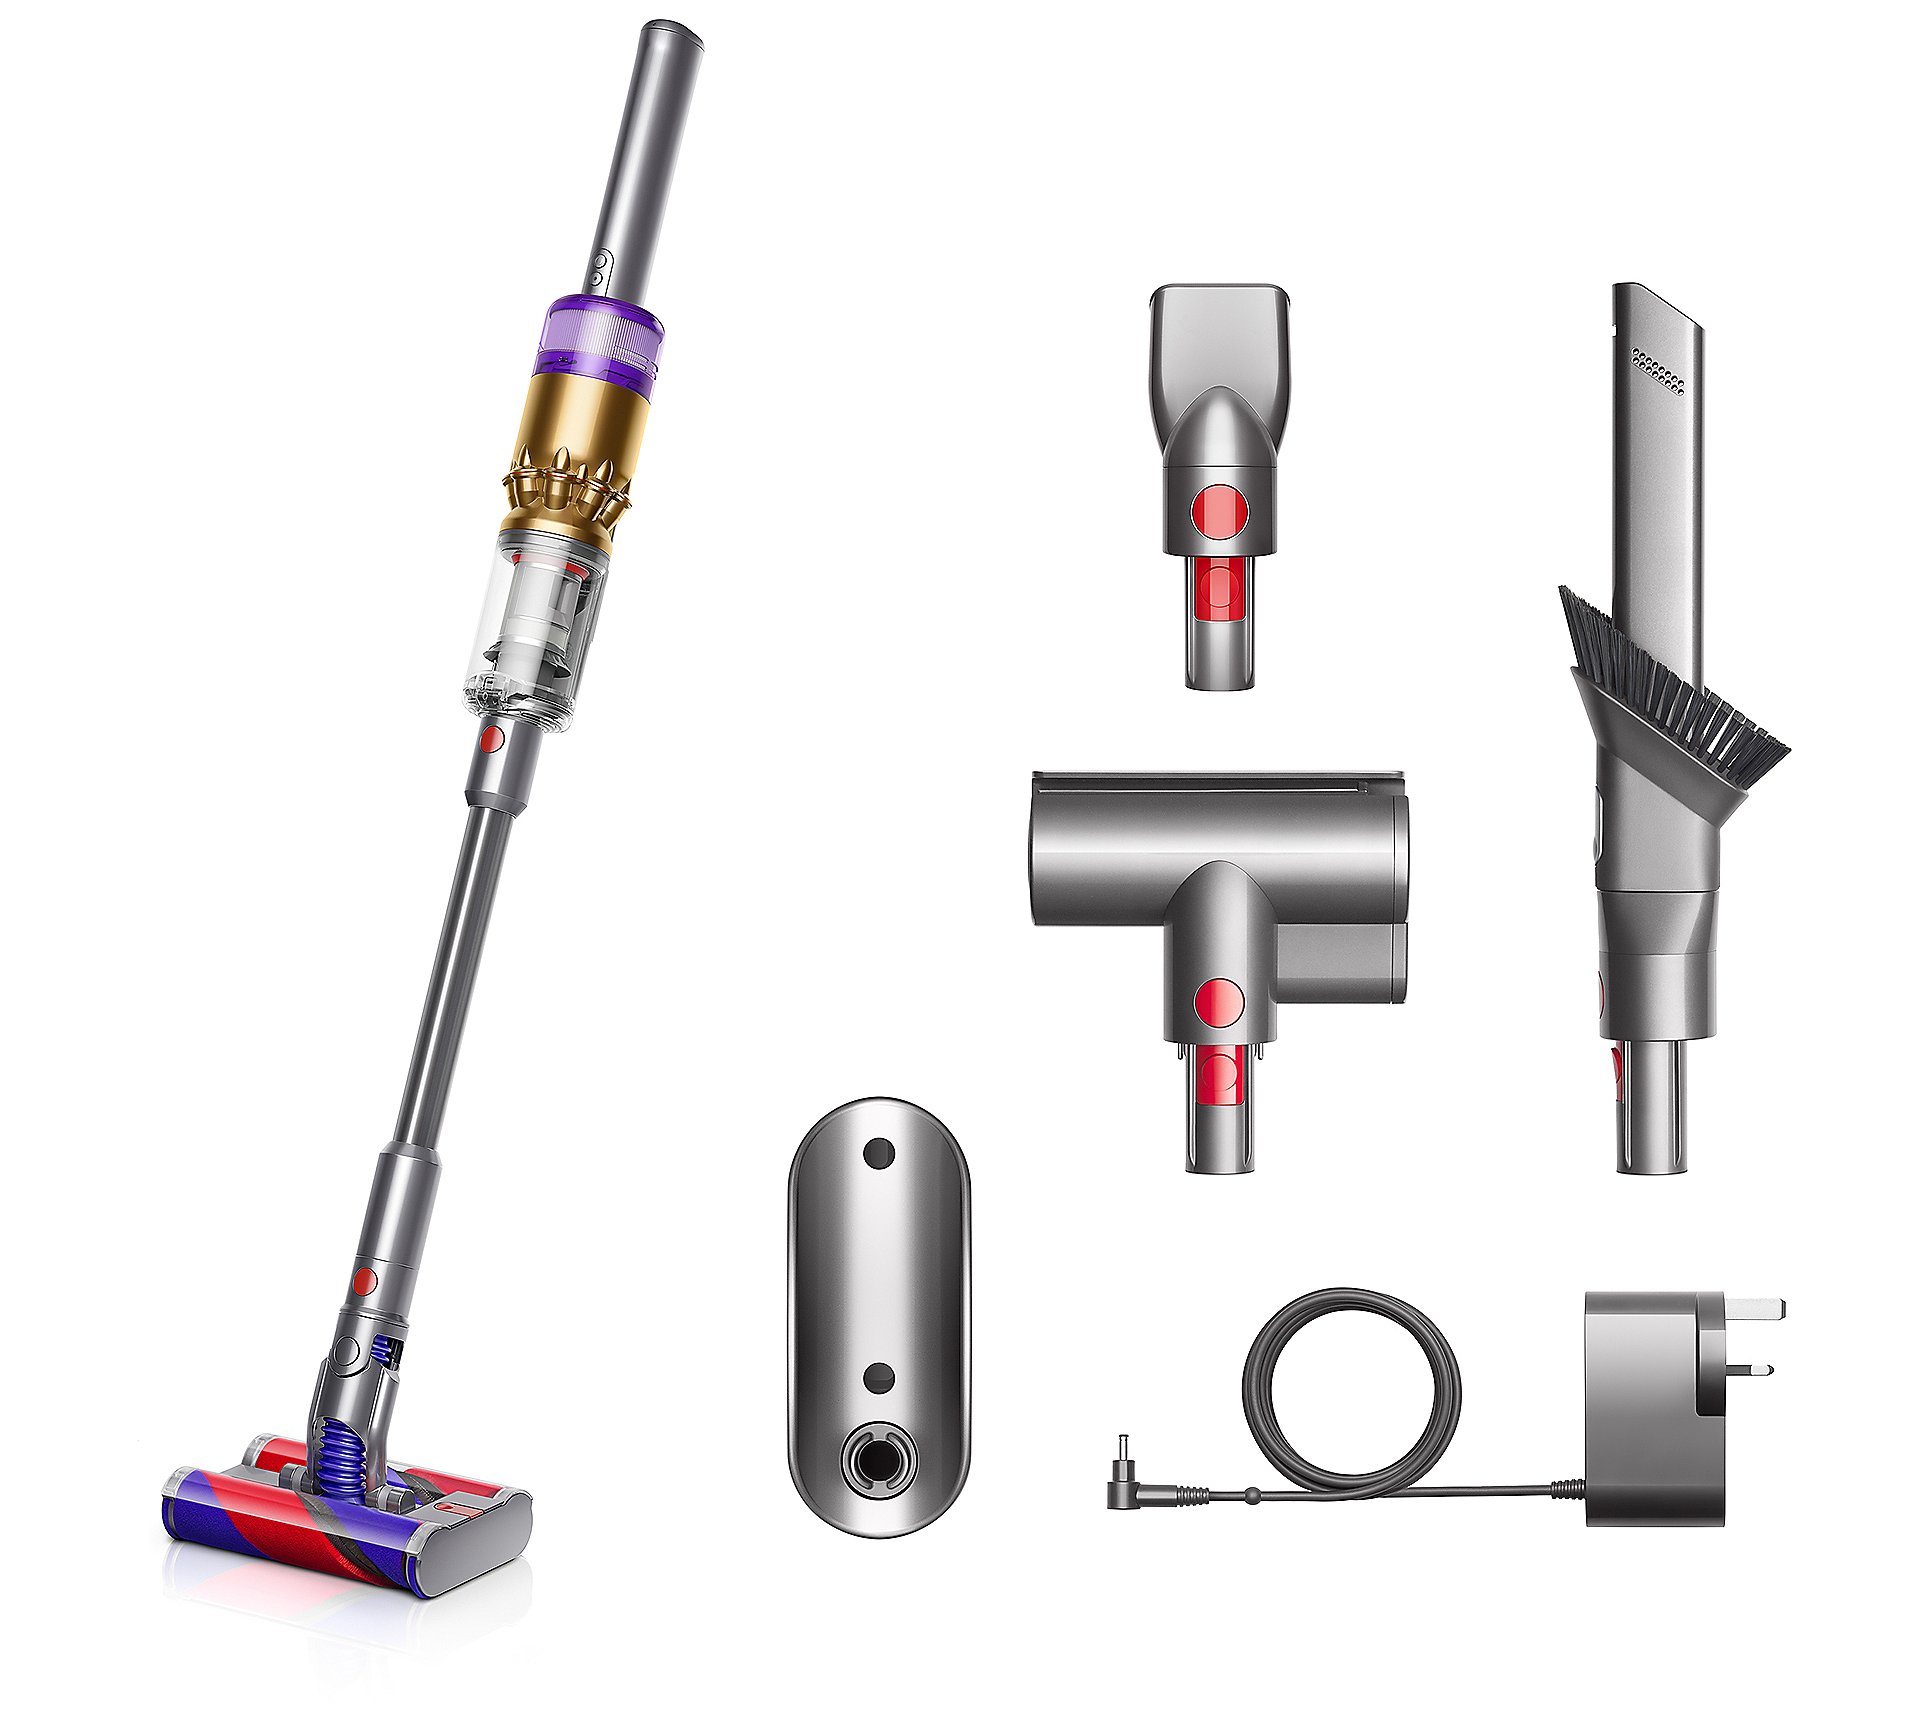 Dyson Omni-Glide Cordless Stick Vacuum Cleaner with 3 Tools (Purple/Nickel)